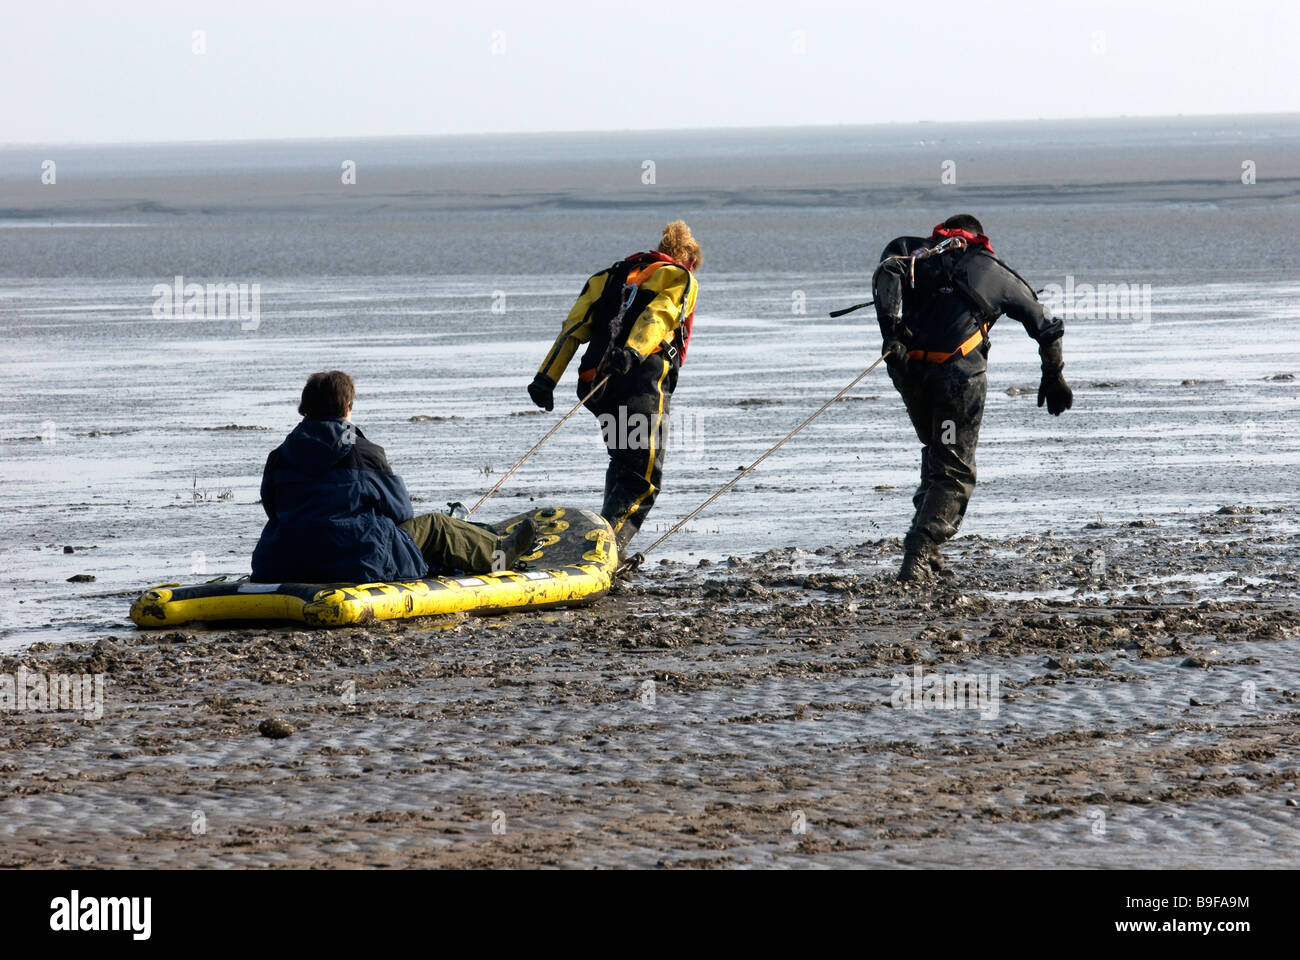 Two Coastguard Rescue Personnel transport a woman on an inflatable skid across mud flats on beach Stock Photo